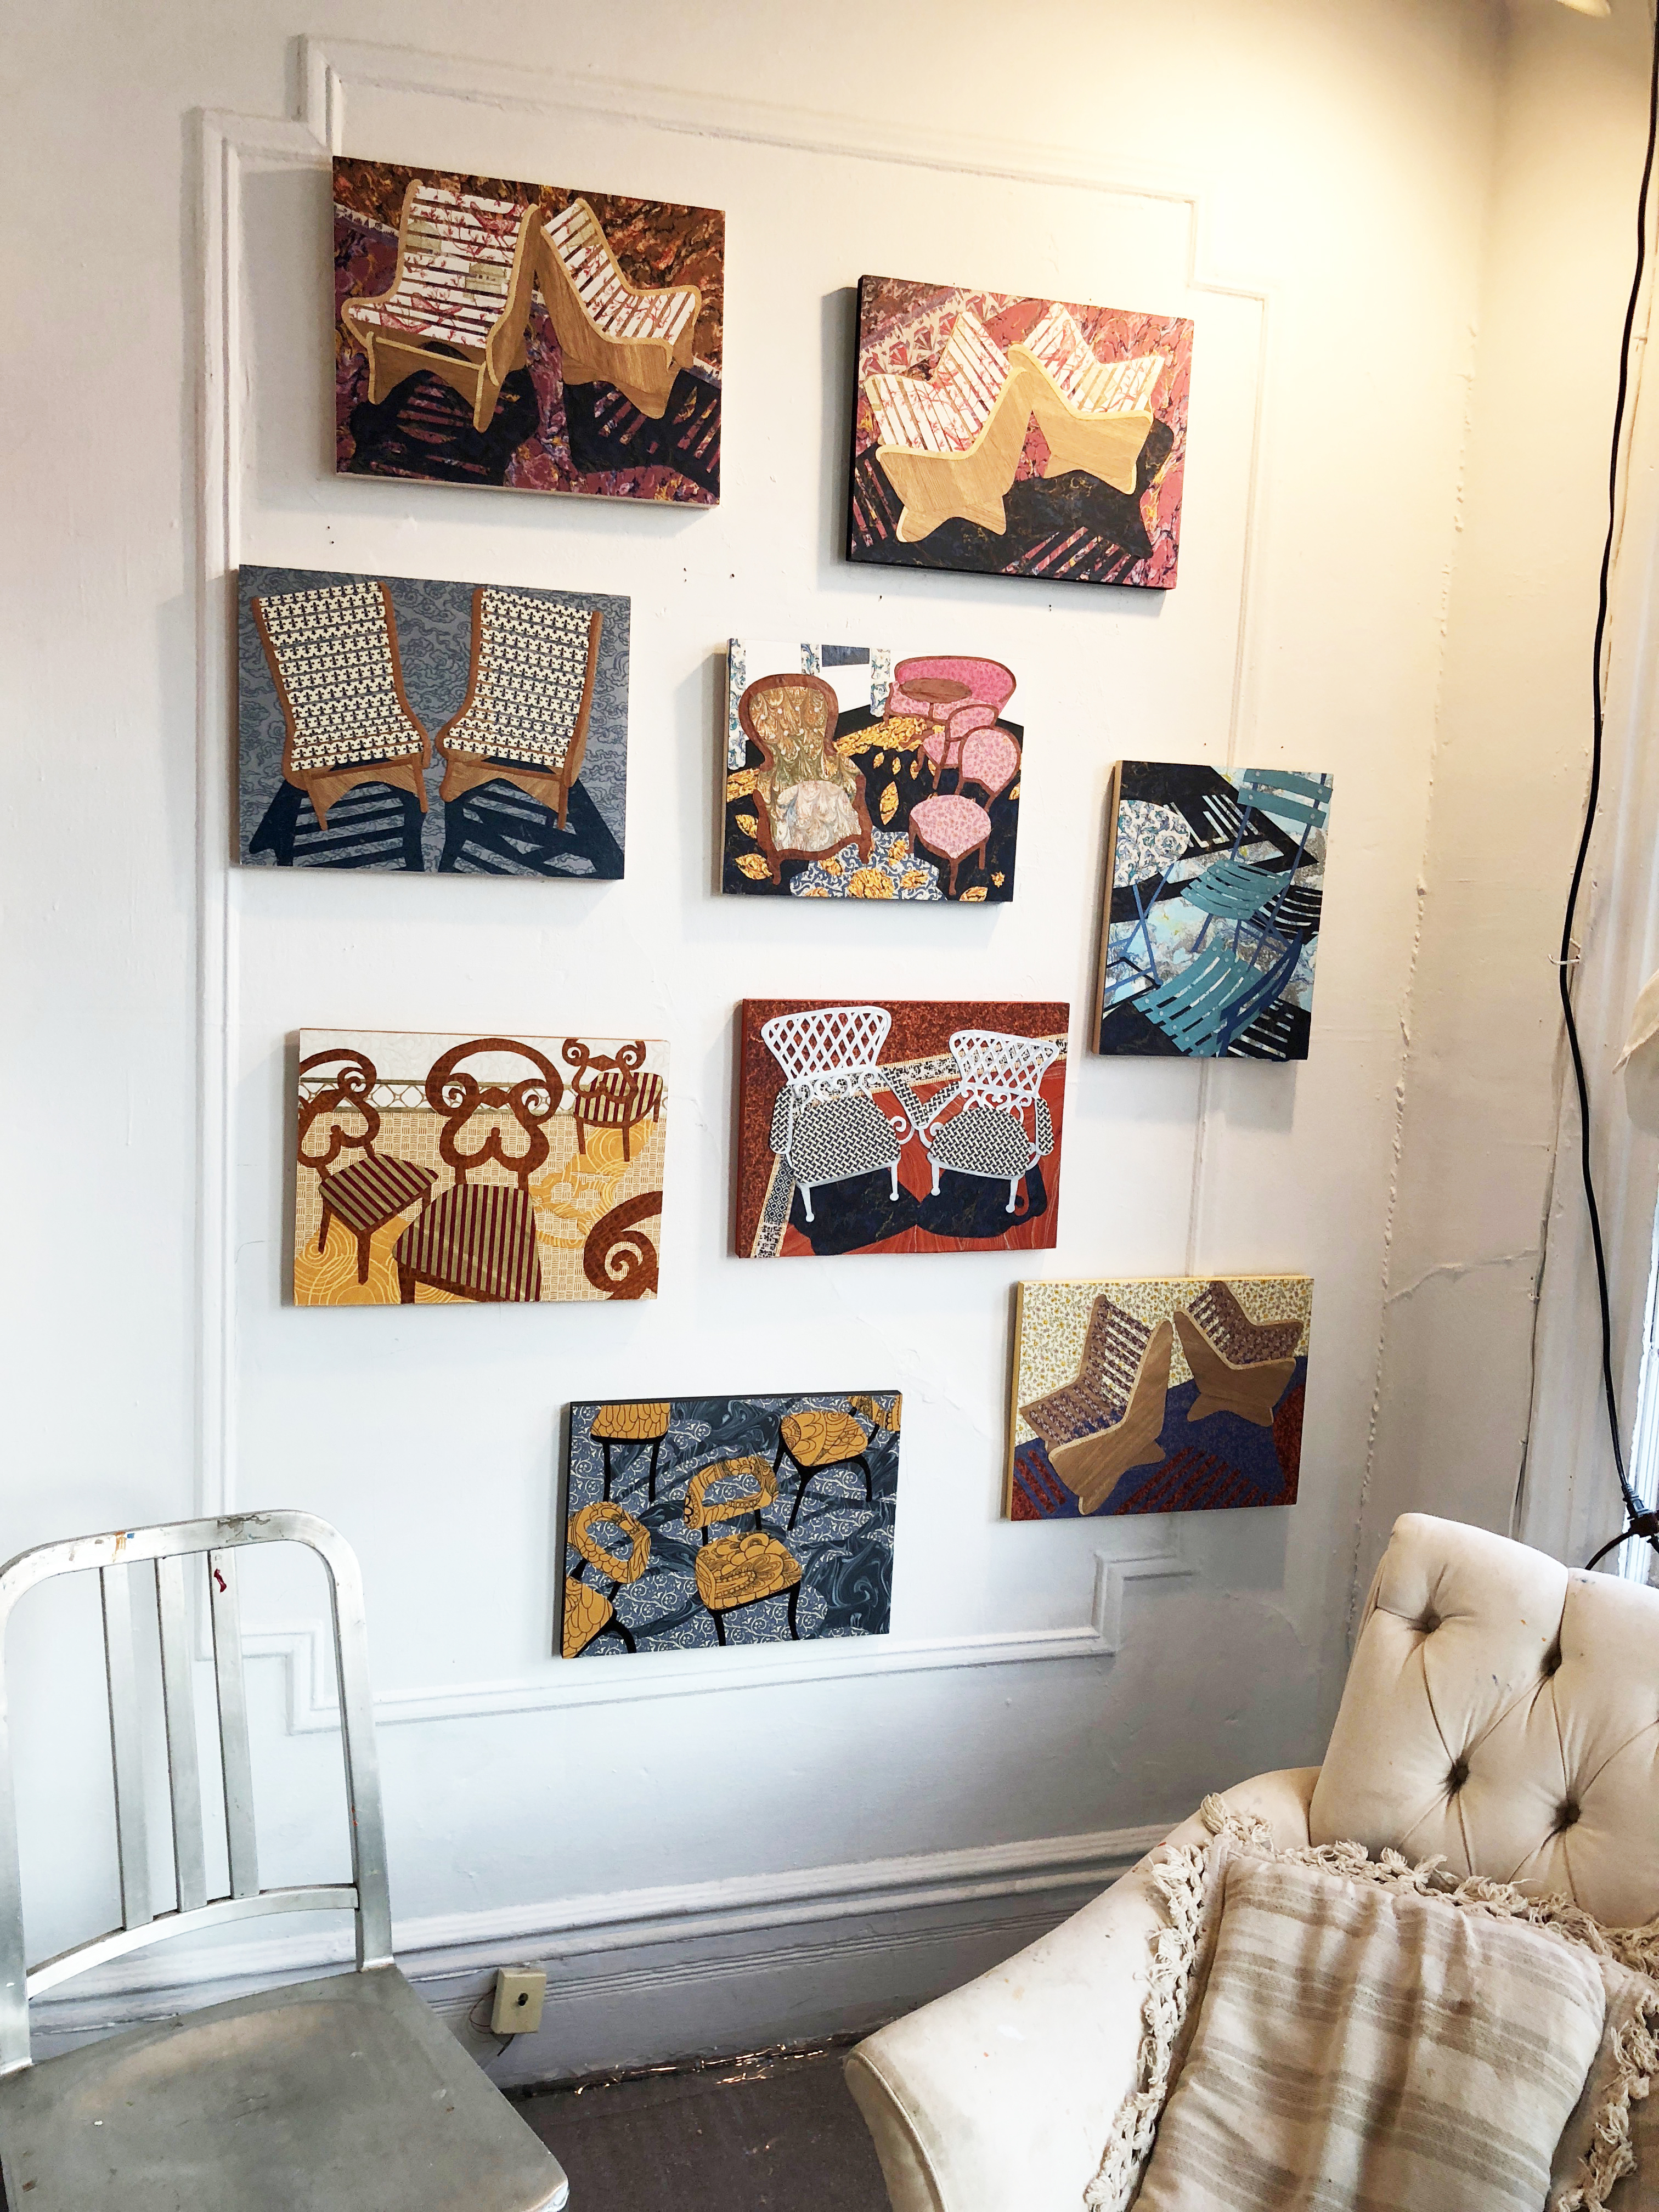 Roxa Smith's collages inside her studio. Image courtesy of the artist.